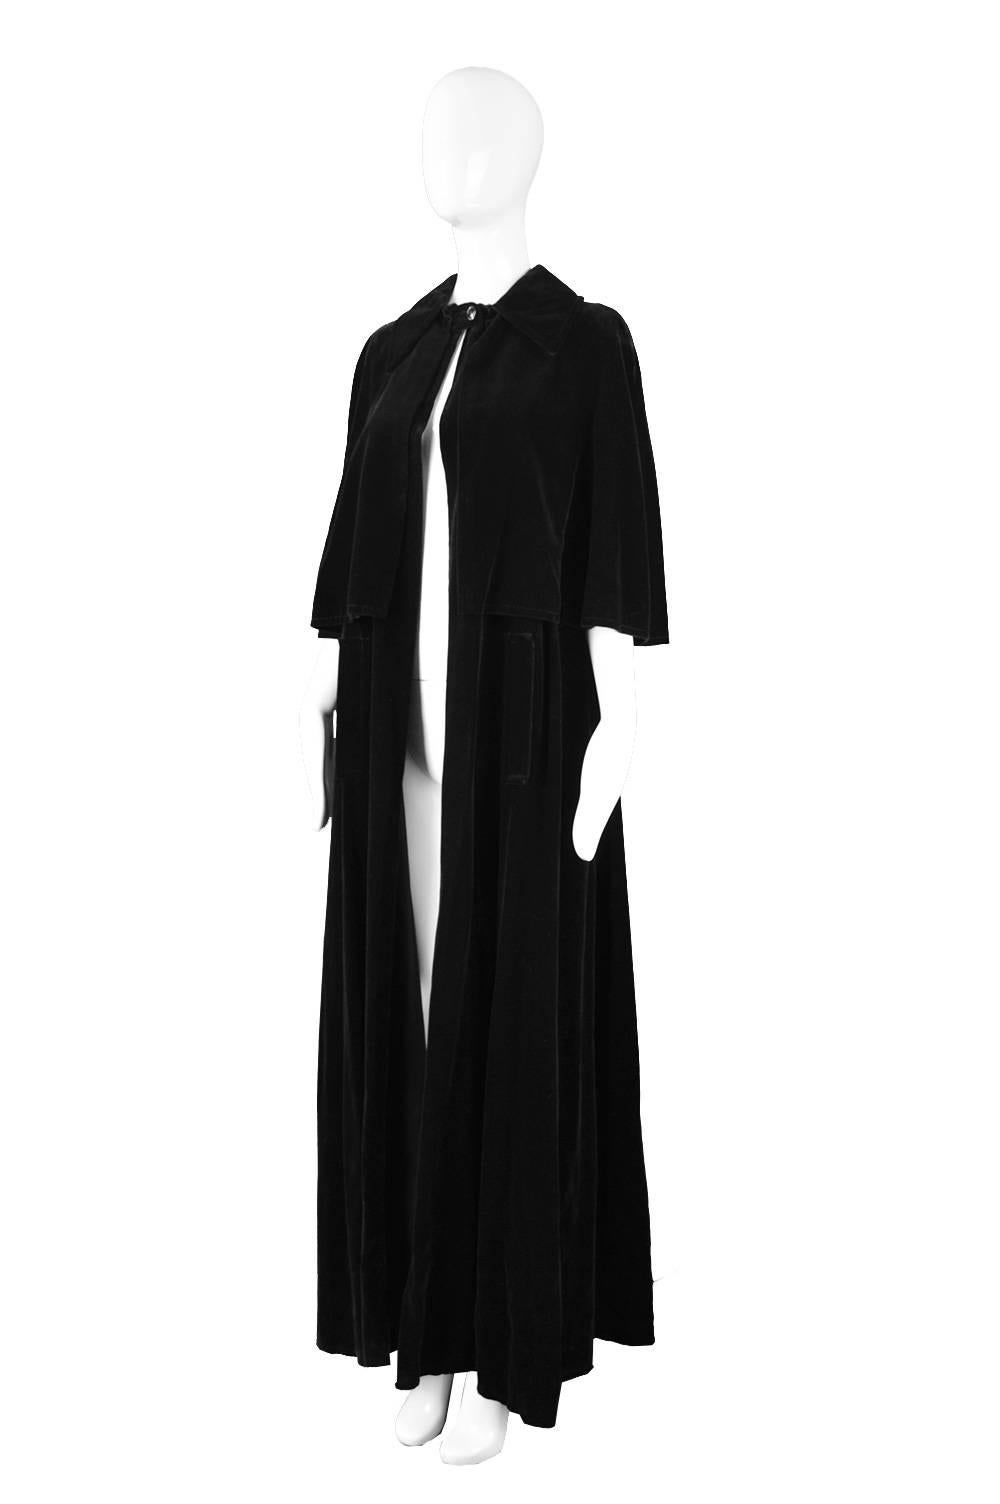 A rare, dramatic and sophisticated vintage full length cape/ cloak by couturier and highly collectible French designer, Louis Feraud c.late 1960s or early 1970s. 

Size: Women's Small to Large - not meant to be fitted.
Bust - Up to 44” / 112cm
Waist